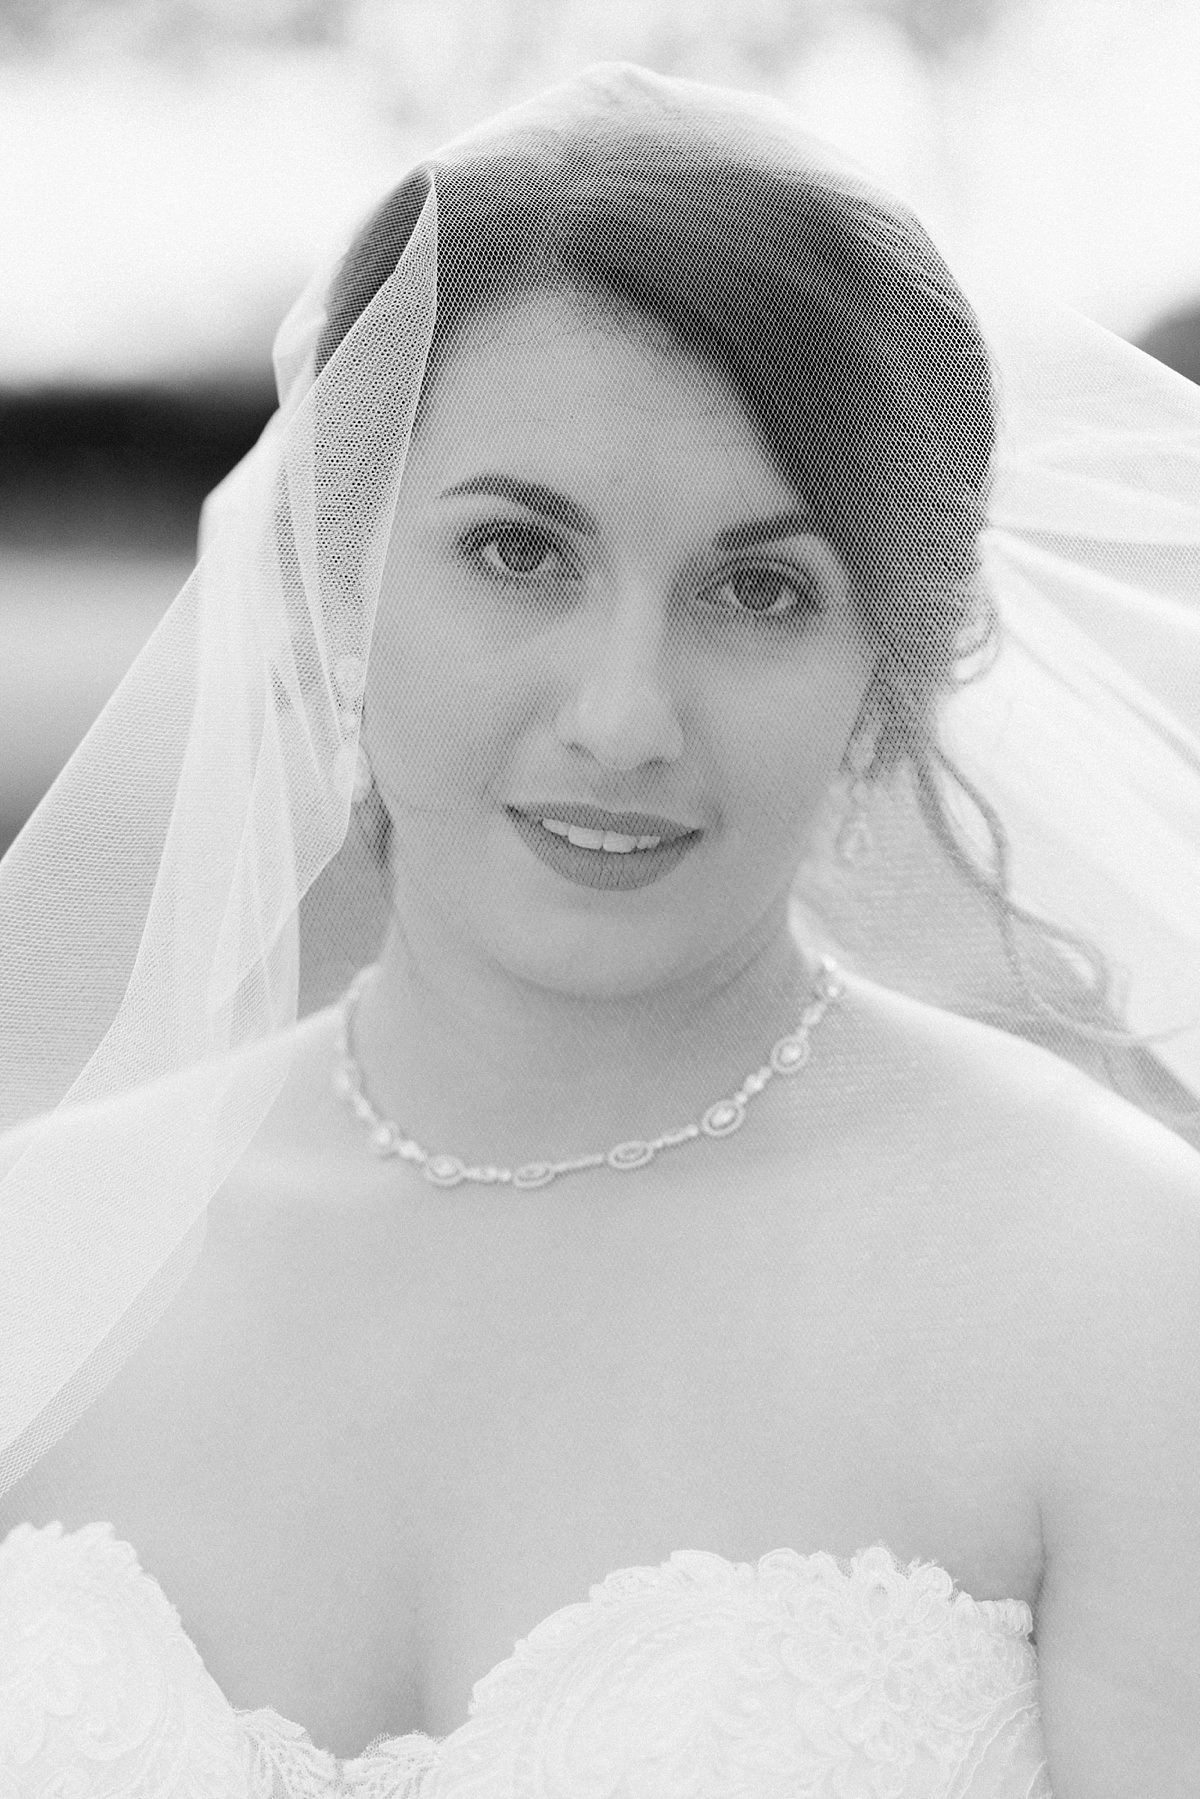 Nicole Bridal Portraits | The Springs in Weatherford, Fort Worth Wedding Photographer, DFW Bride, Weatherford, Texas Wedding, DFW Photographer_0036